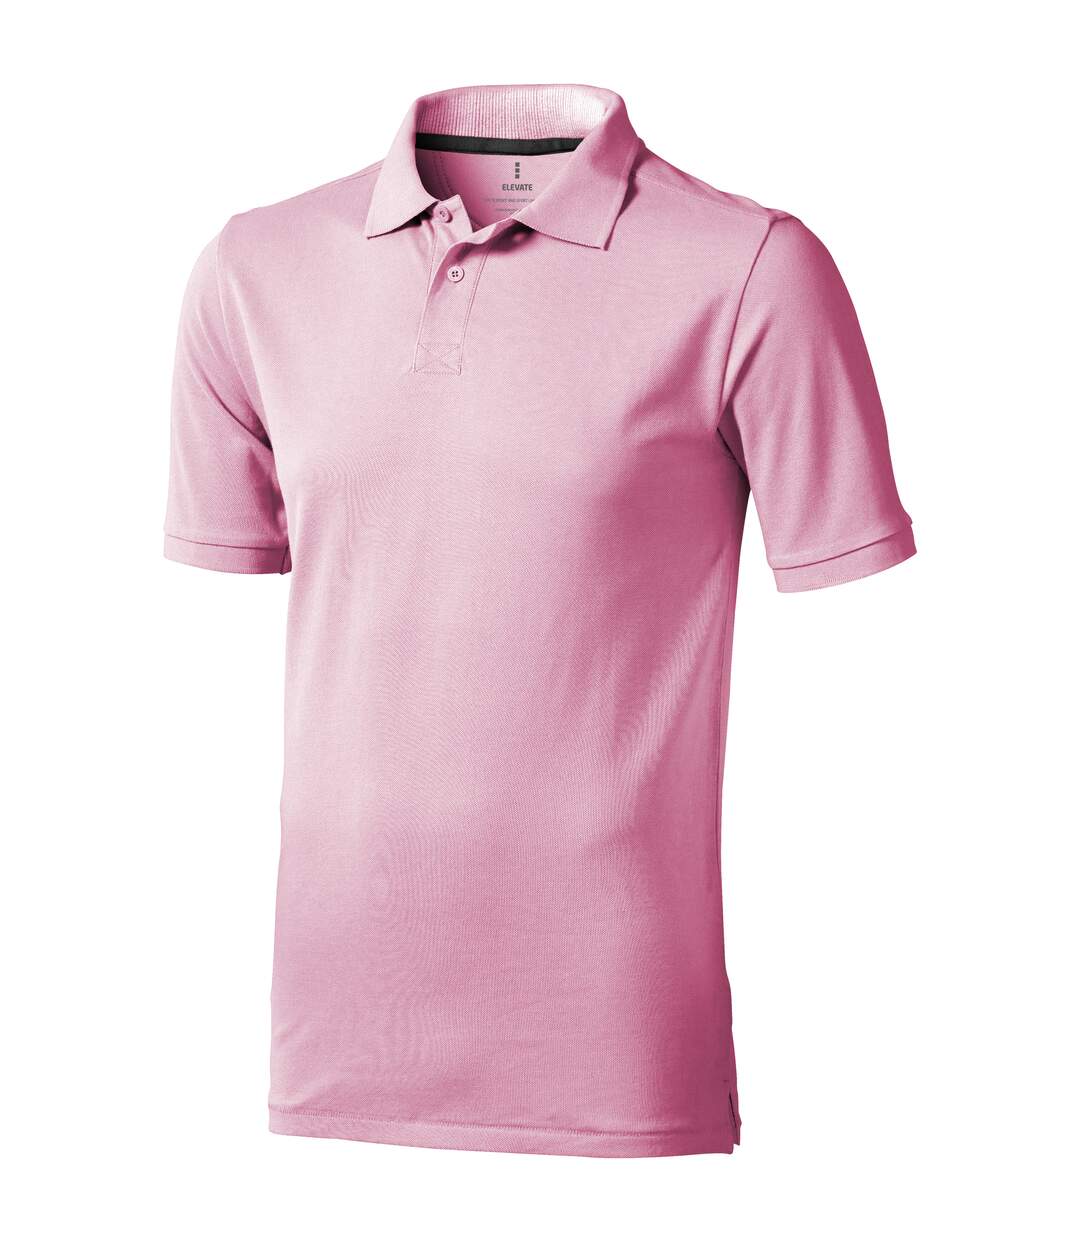 Elevate - Polo manches courtes Calgary - Homme (Rose clair) - UTPF1816